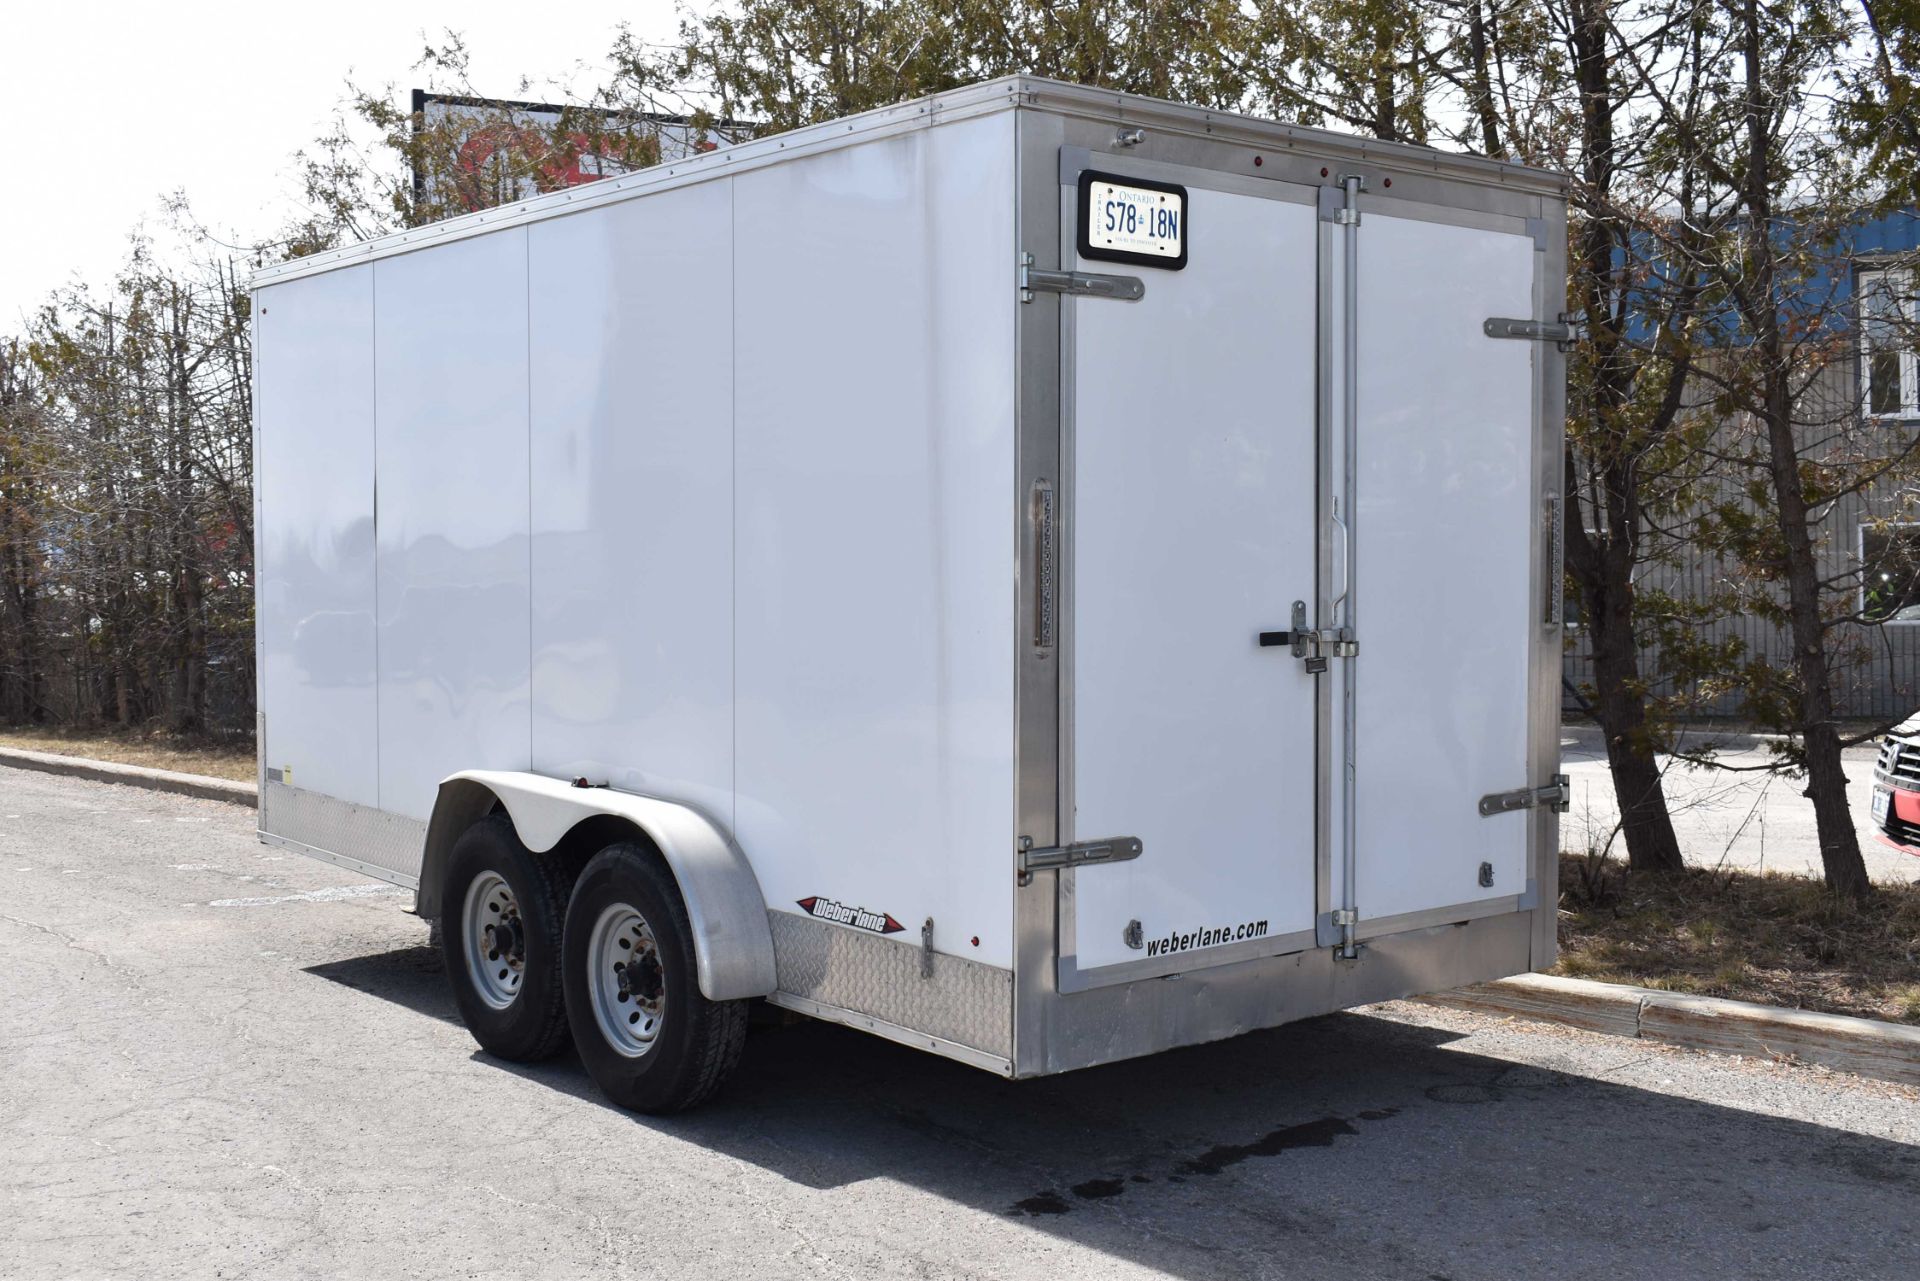 WEBERLANE (2020) W716CCTW TANDEM AXLE ENCLOSED UTILITY TRAILER WITH RAMPS, 15,652 LB GVWR, VIN: - Image 3 of 14